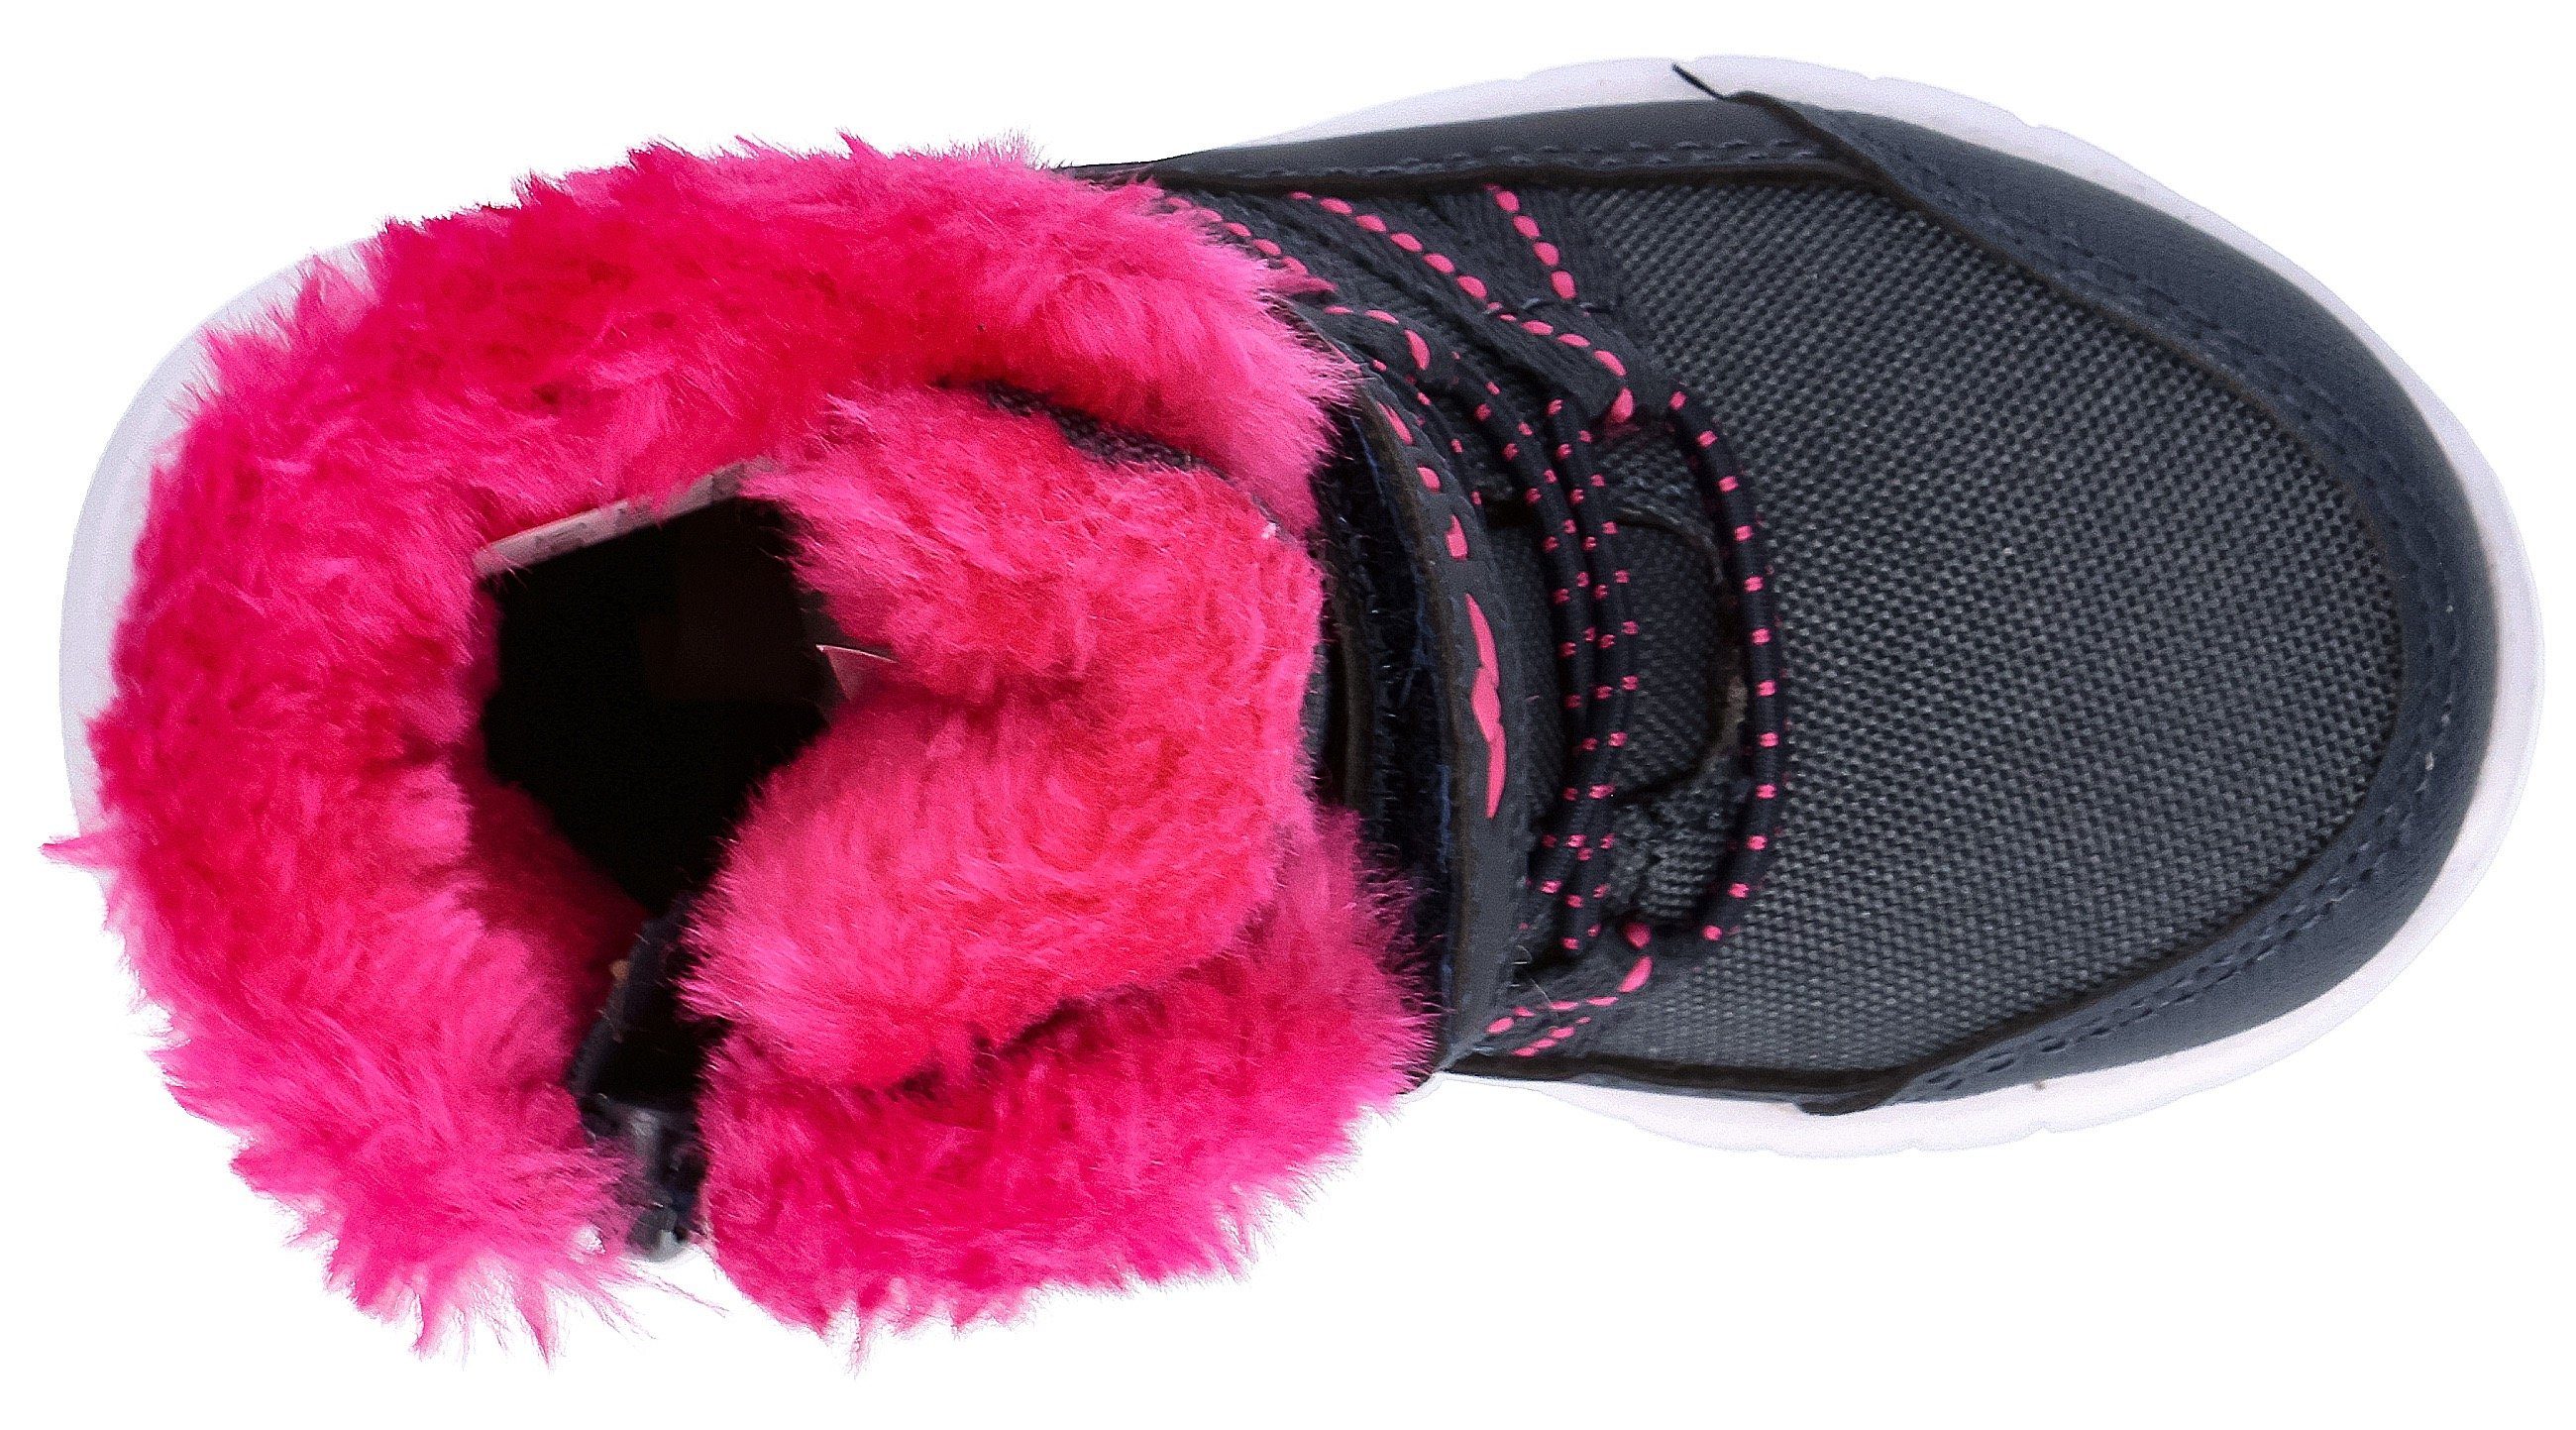 Warmfutter Lico mit Winterboots navy-pink Shalby